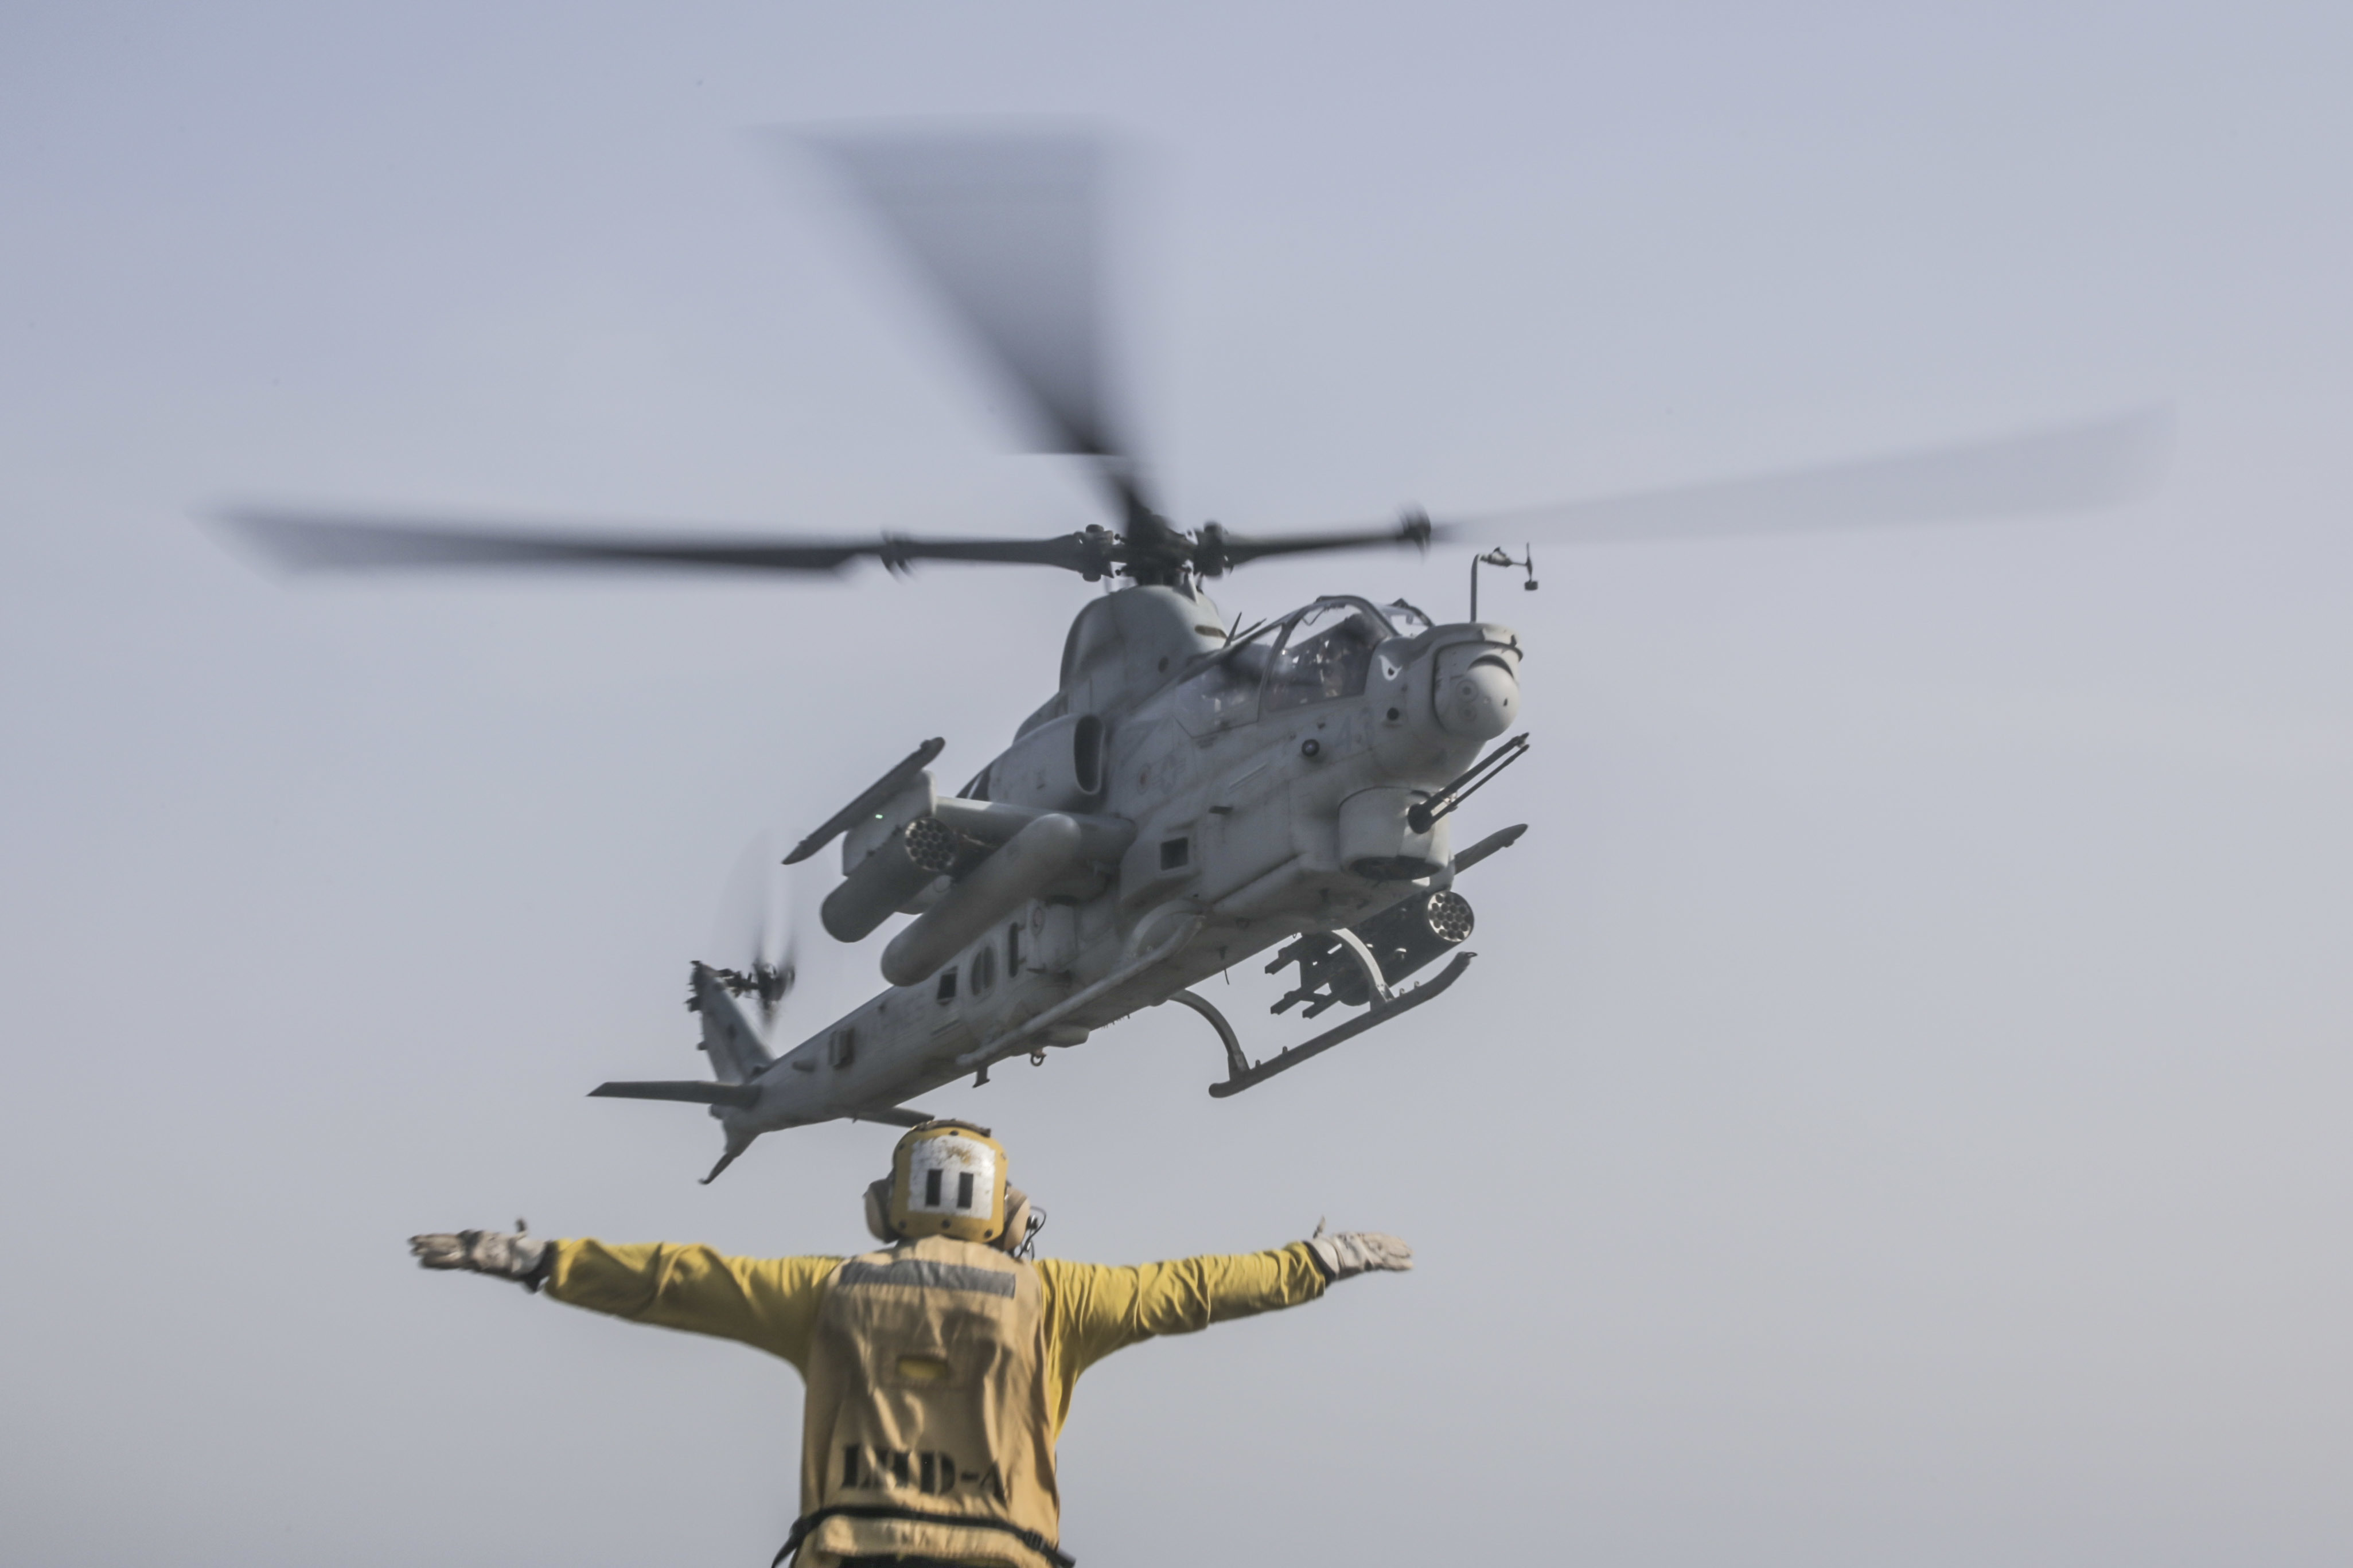 Iranian Navy shines laser at US helicopter during 'unsafe' interaction